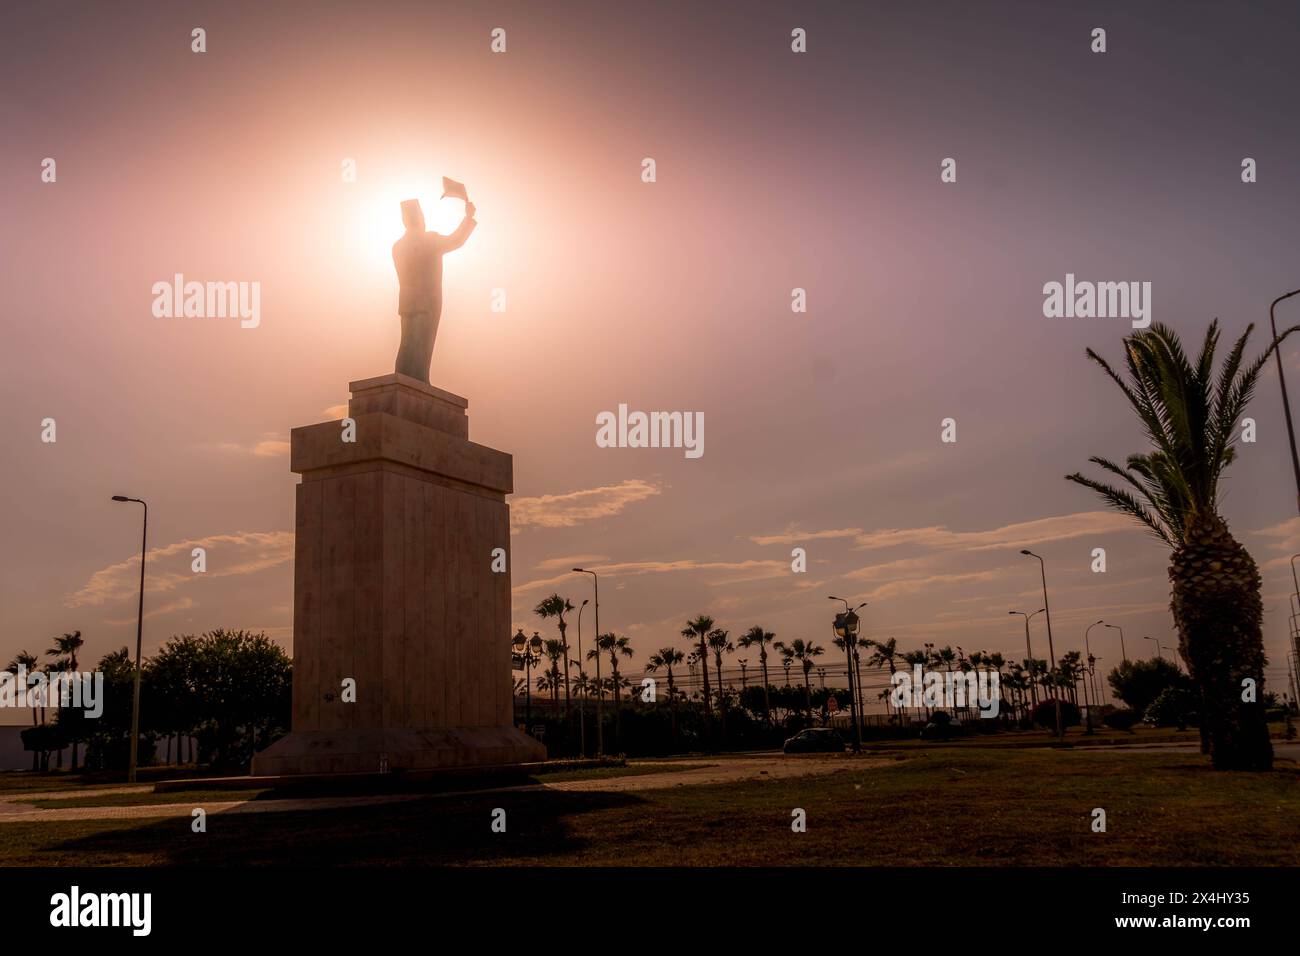 The monument of Habib Bourguiba, a historic Tunisian politician and the former president, in the center of Tunis during summer heat wave. Stock Photo